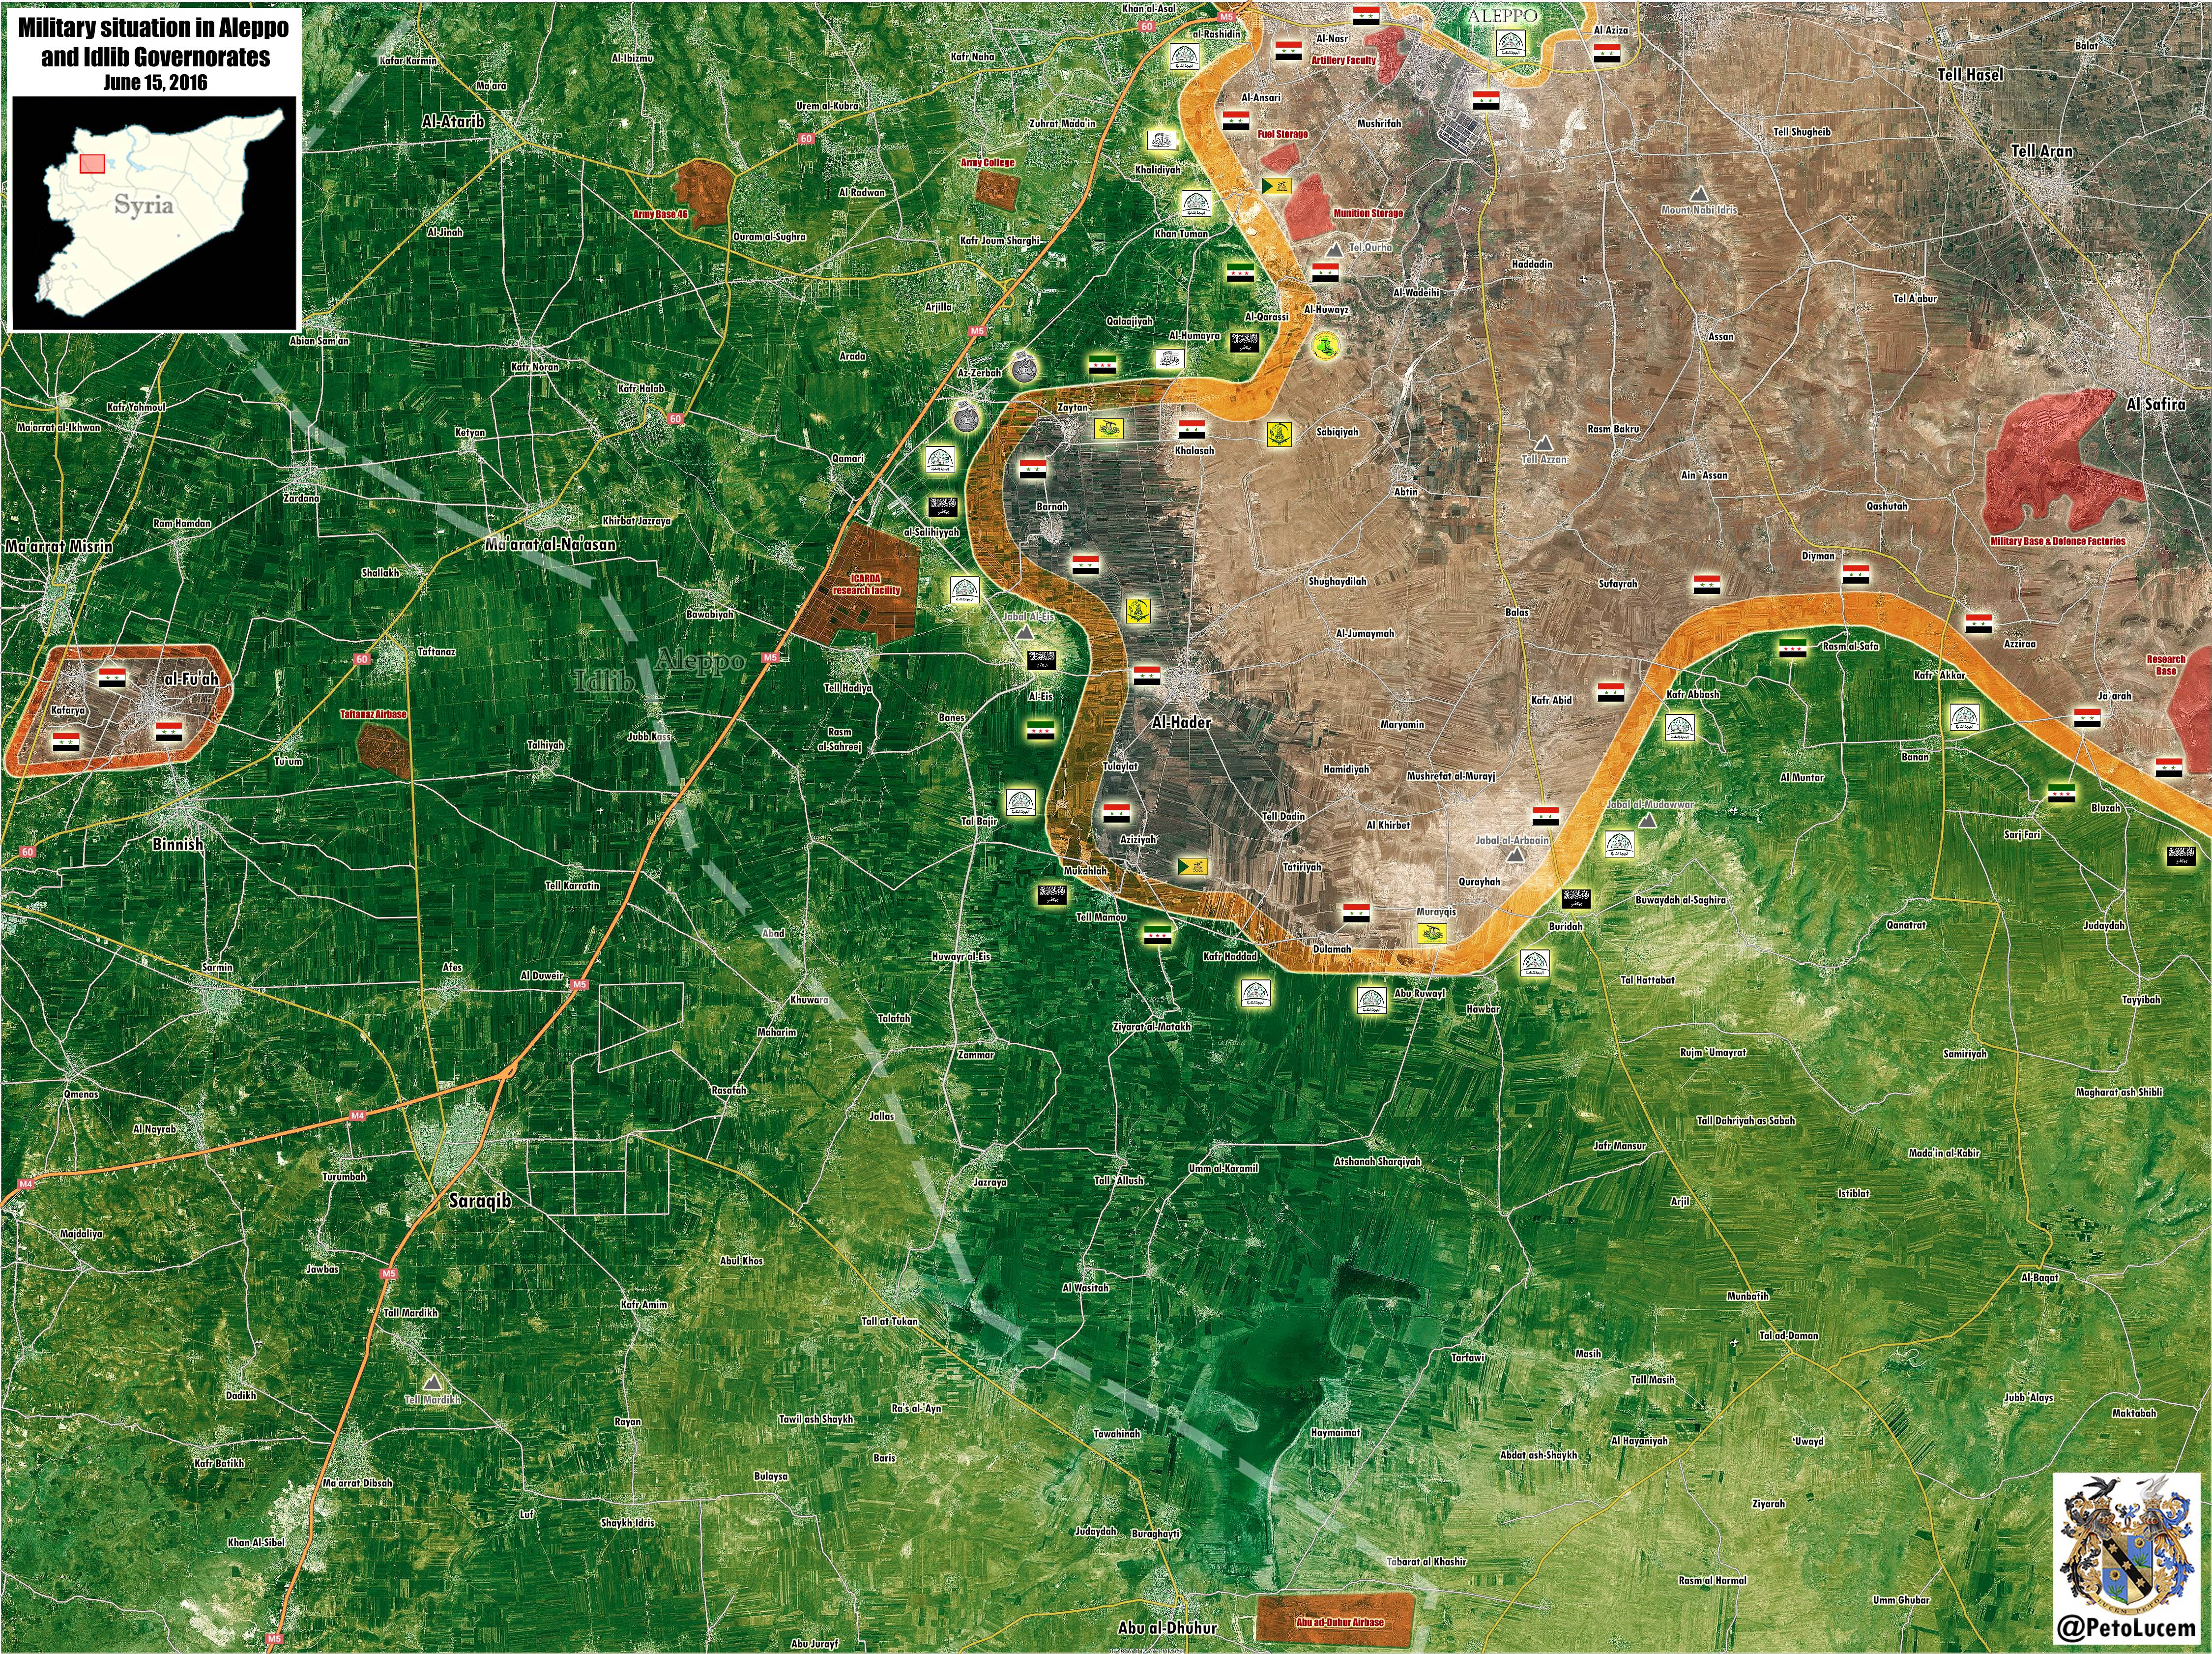 Military Situation in Syria's Provinces of Aleppo and Idlib on June 15